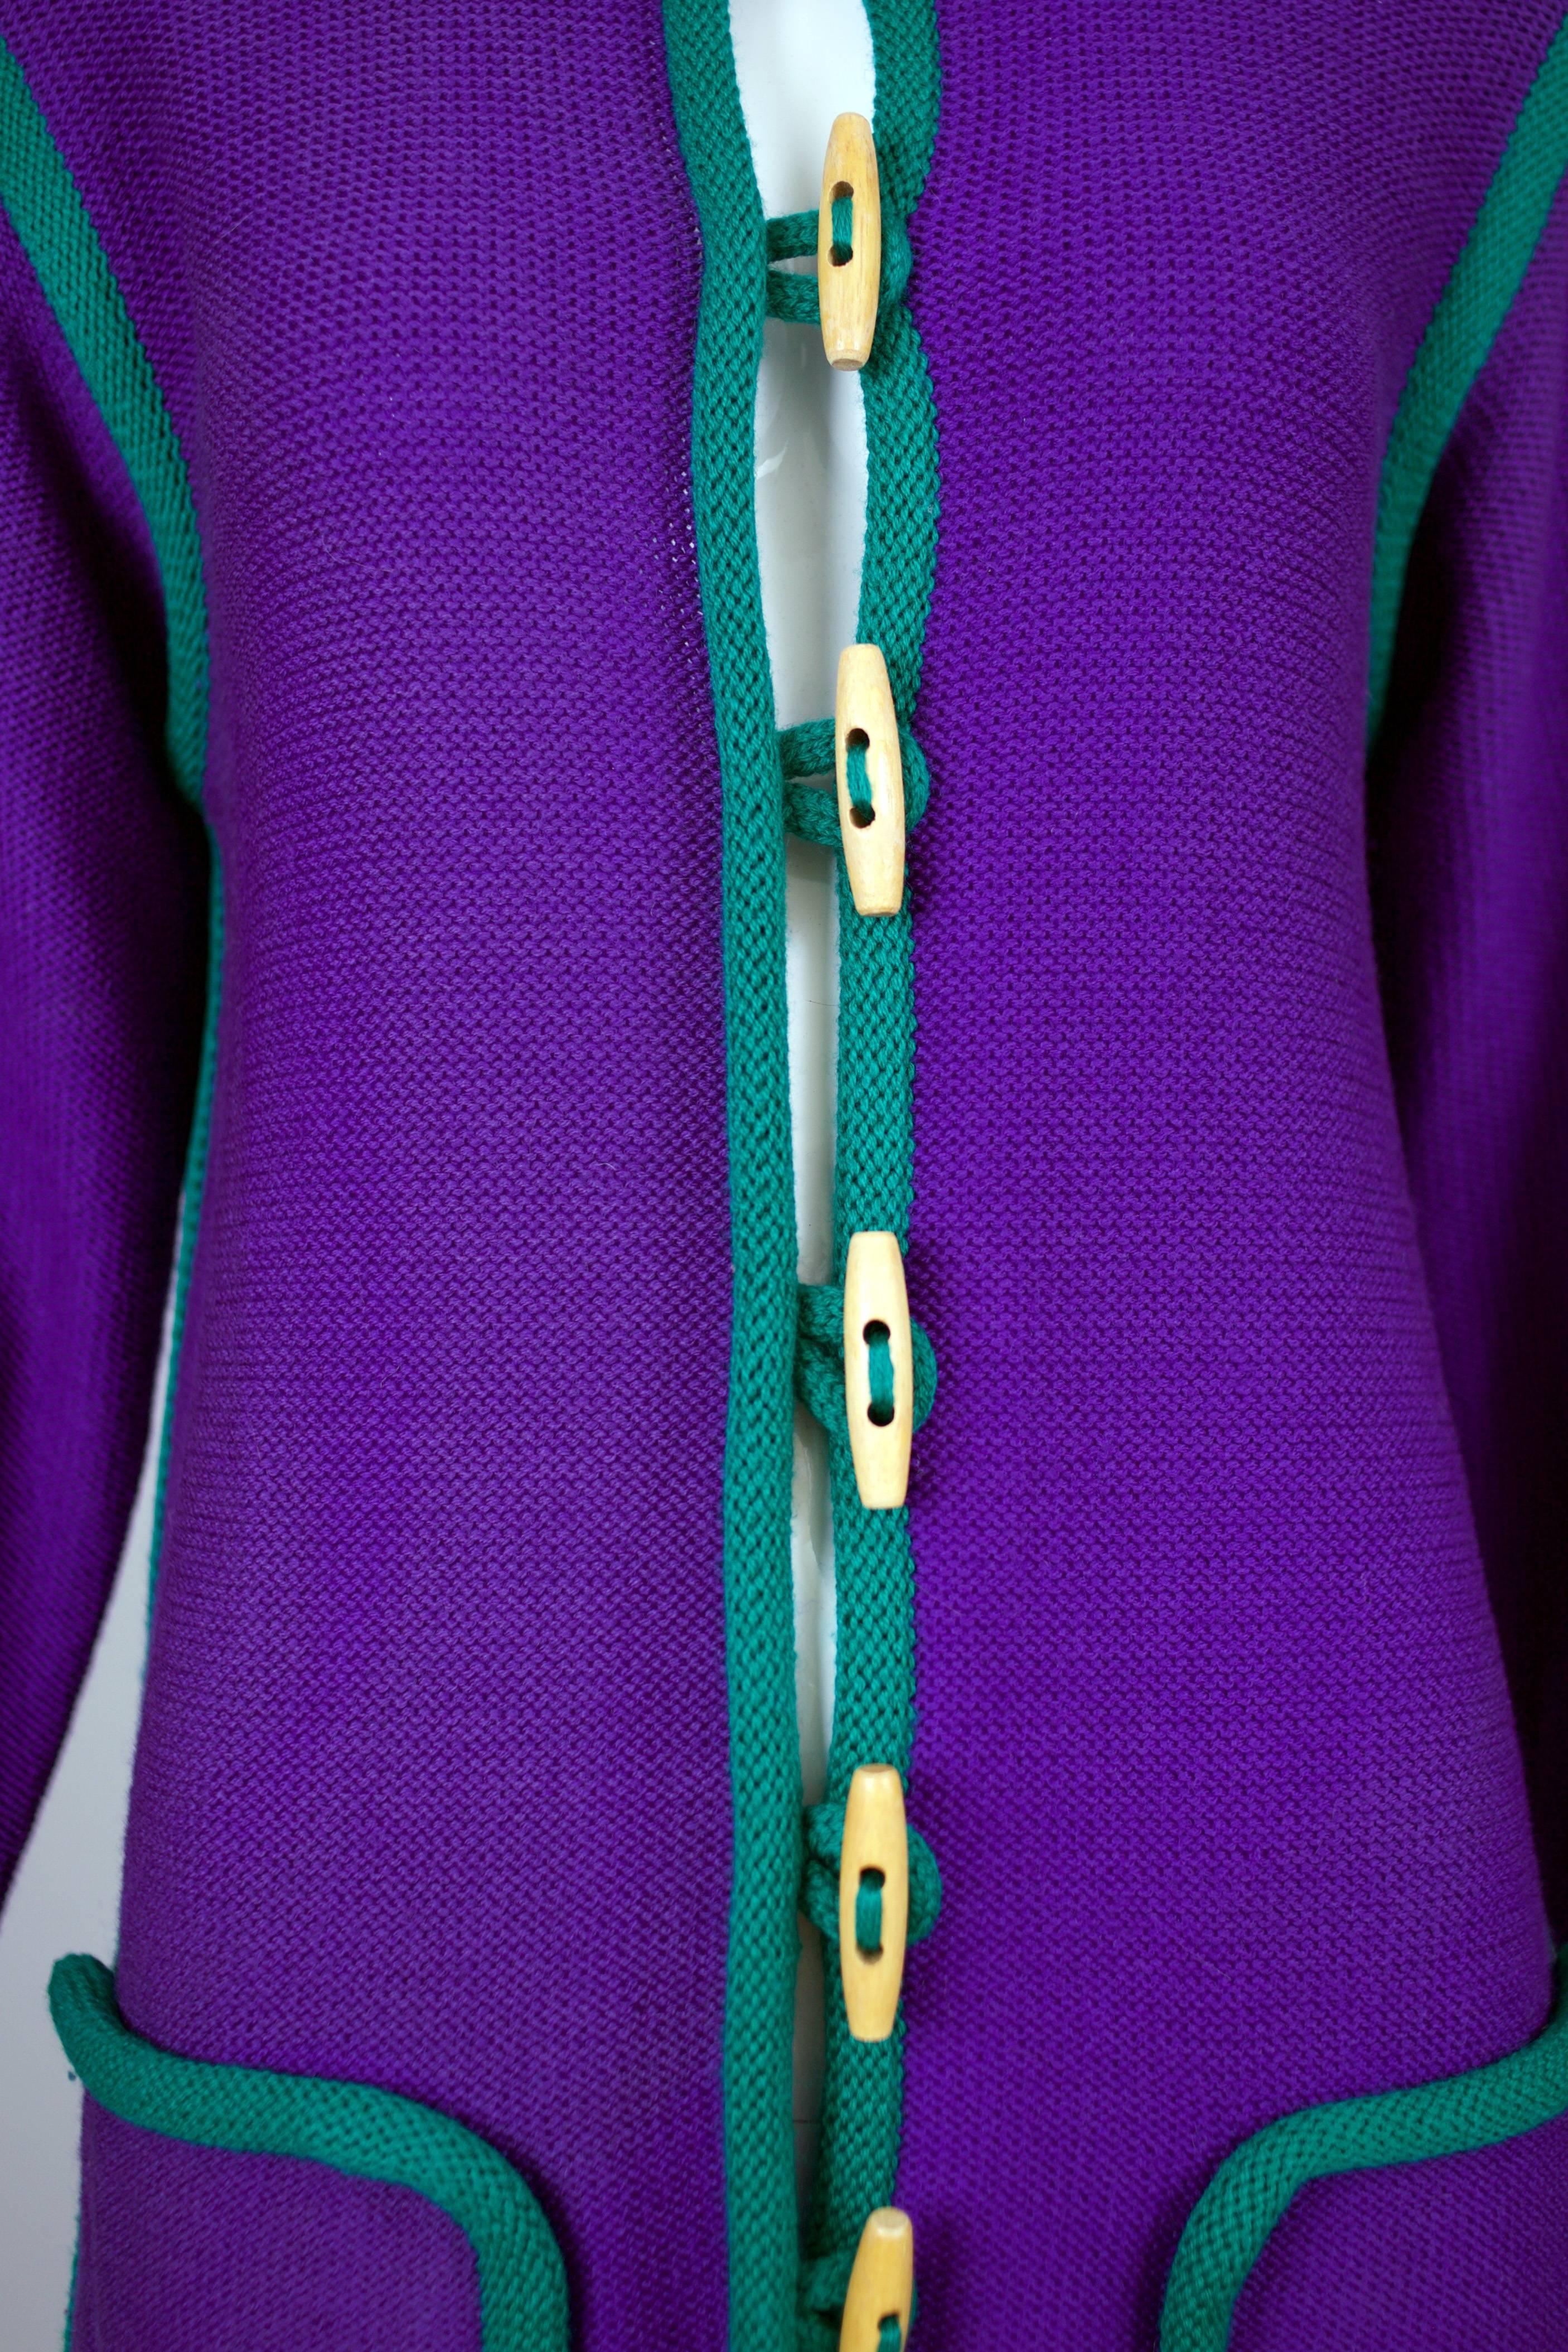 Vintage Yves Saint Laurent deep purple wool knit cardigan with green knit trim, wooden toggle buttons and a vent at each bottom side seam. Size tag M. In very good condition with several small pulls and a small nickel-sized area of discoloration on